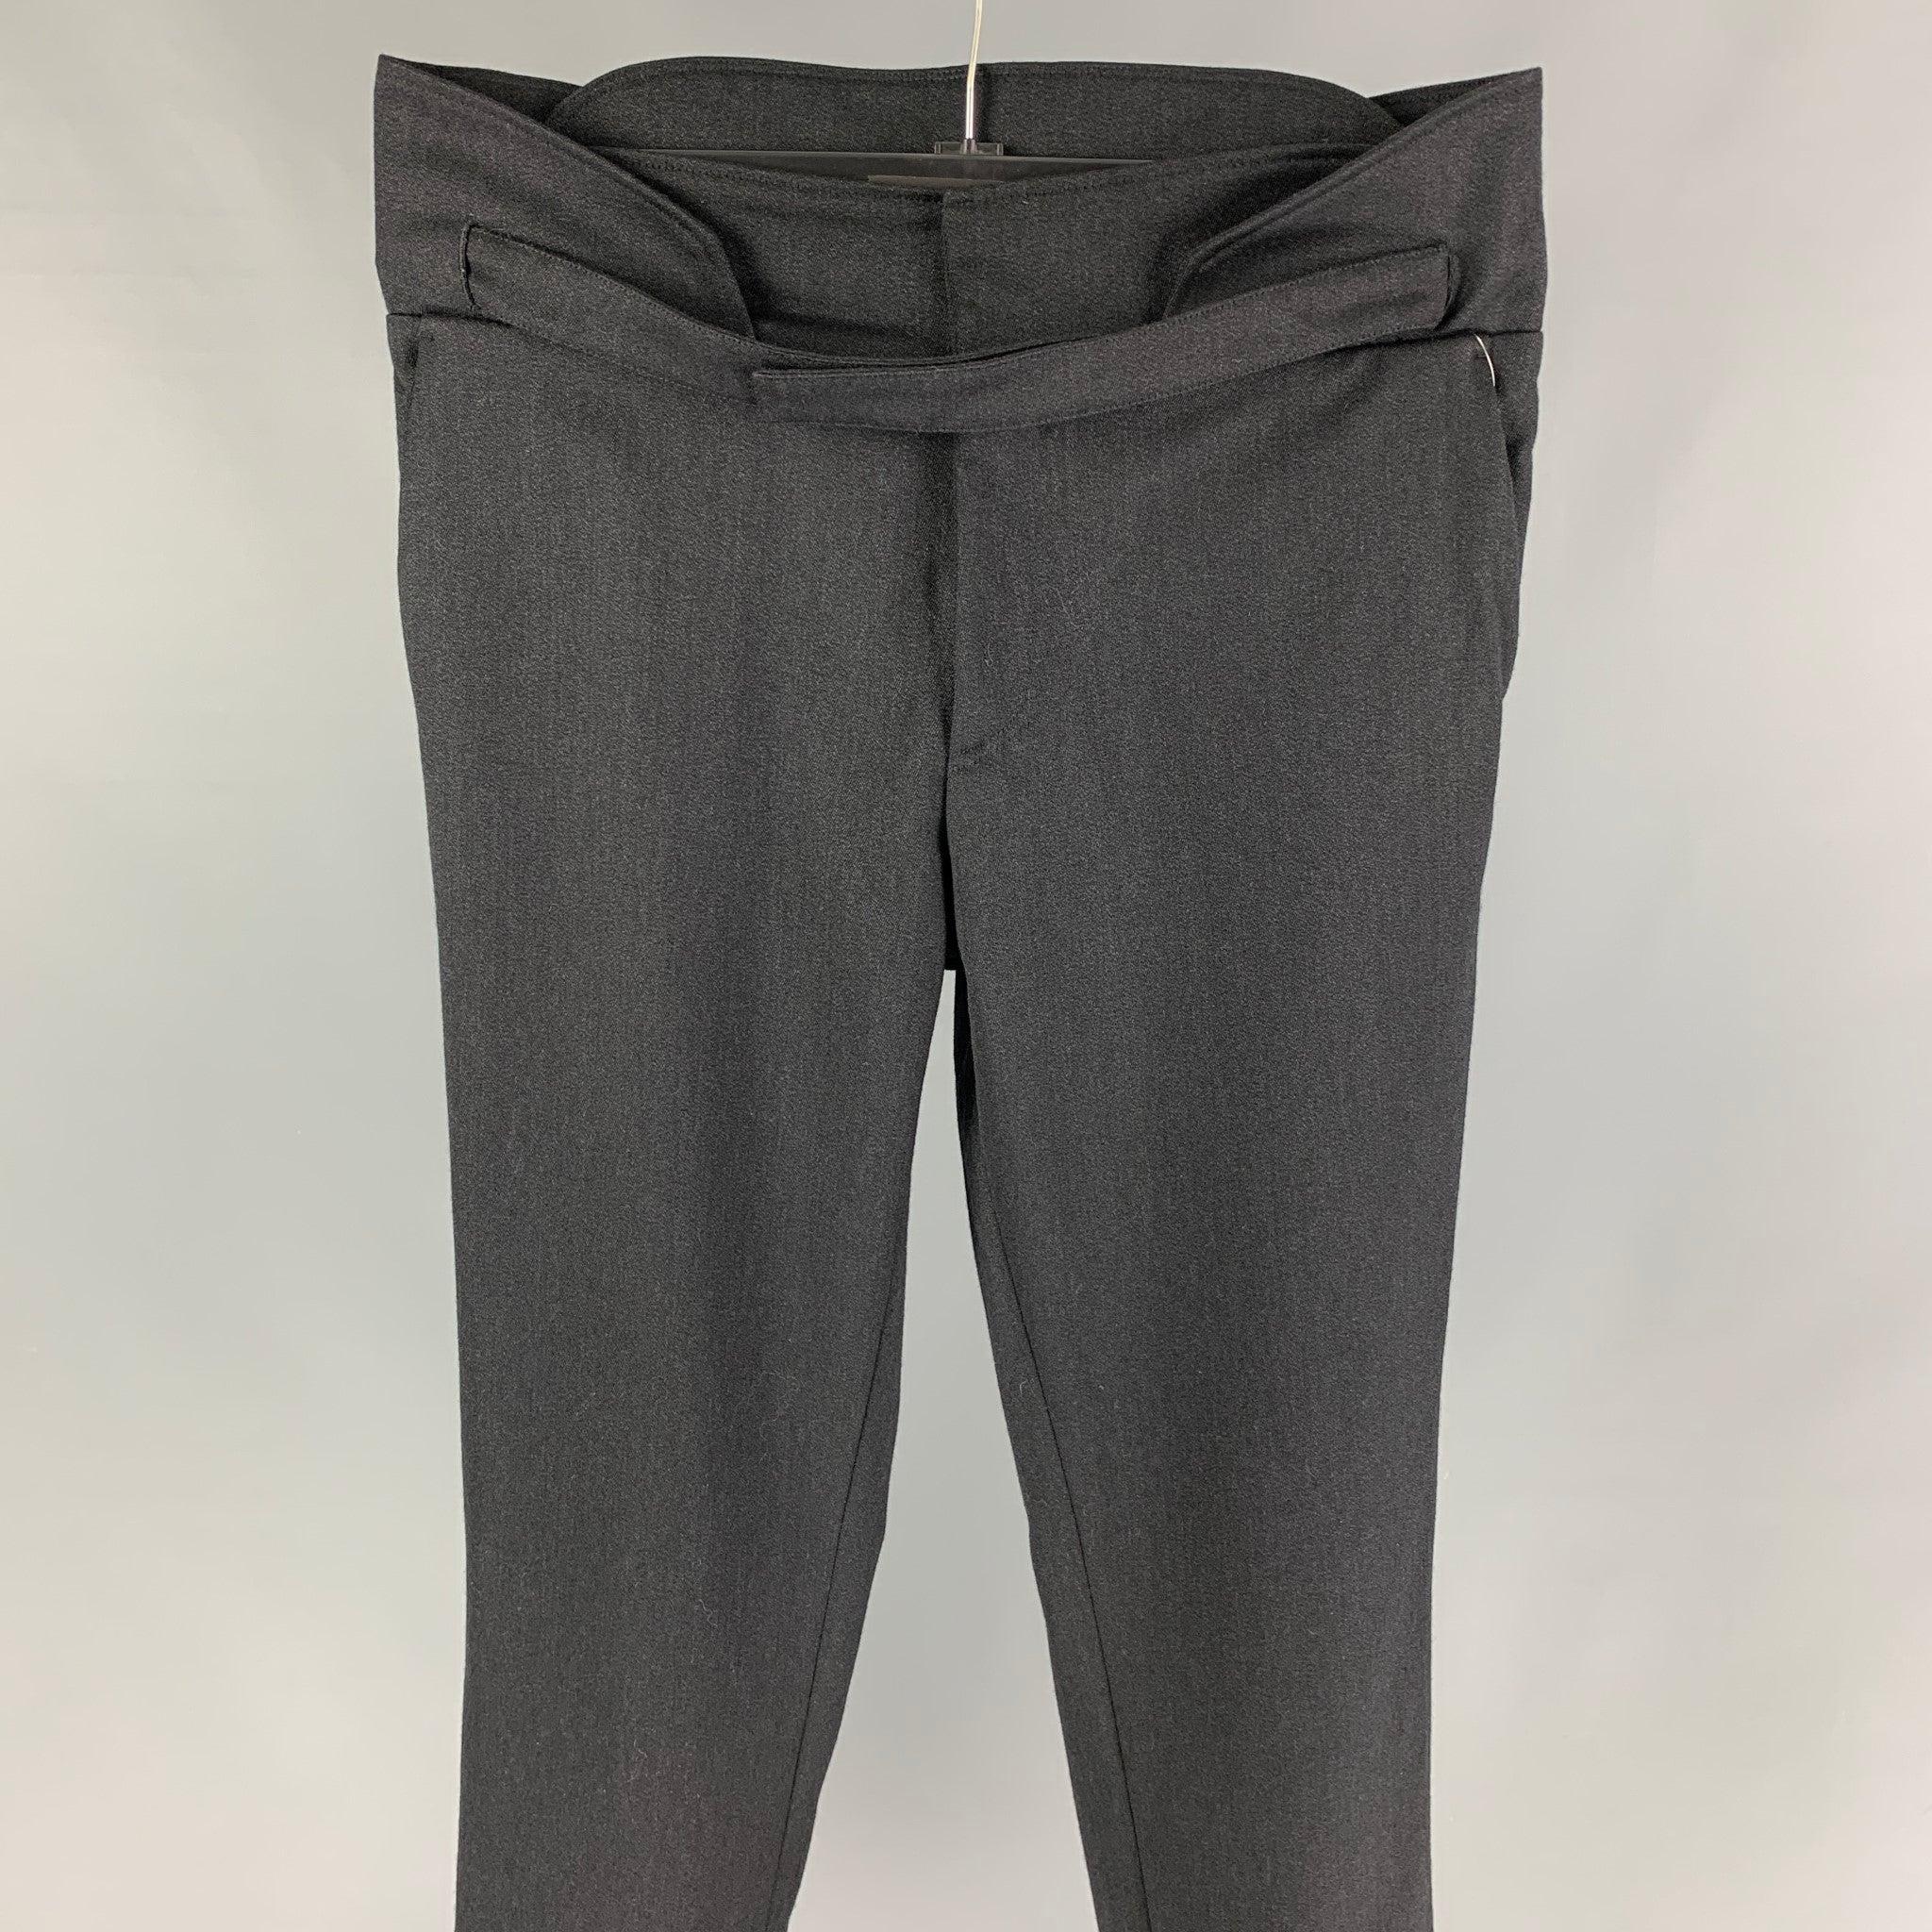 Vintage RAF SIMONS Fall 2016 dress pants comes in a black wool featuring a high waist, front strap tab closure, slim fit, back elastic panel, and a zip fly closure. Made in Romania. Very Good
 Pre-Owned Condition. 
 

 Marked:  50 
 

 Measurements: